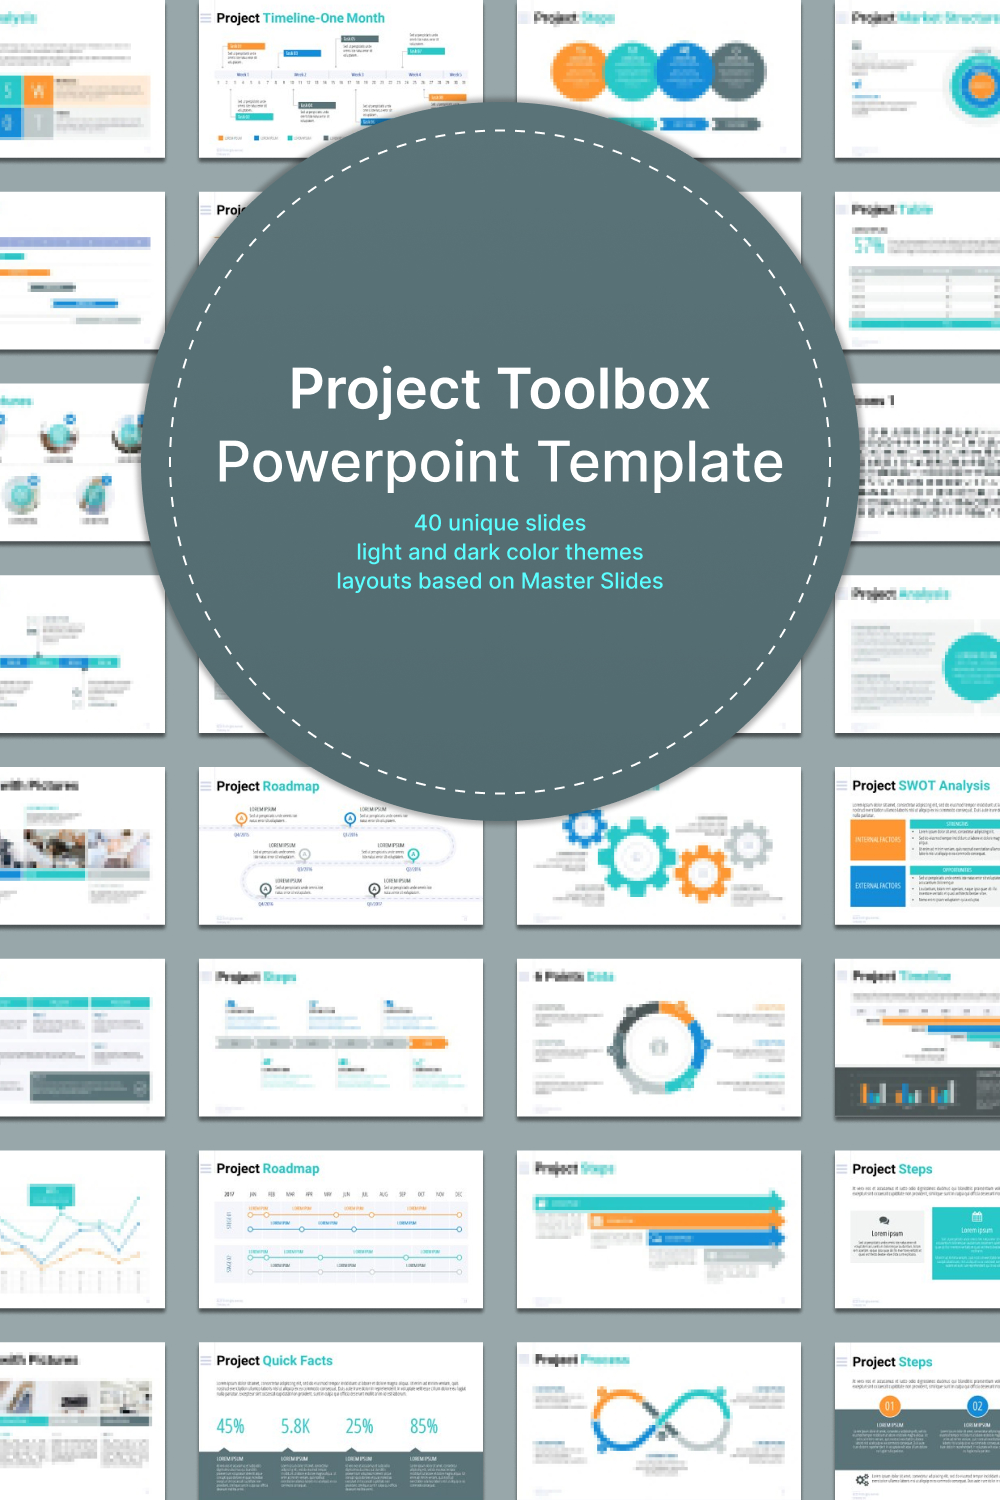 Project toolbox powerpoint template of pinterest.